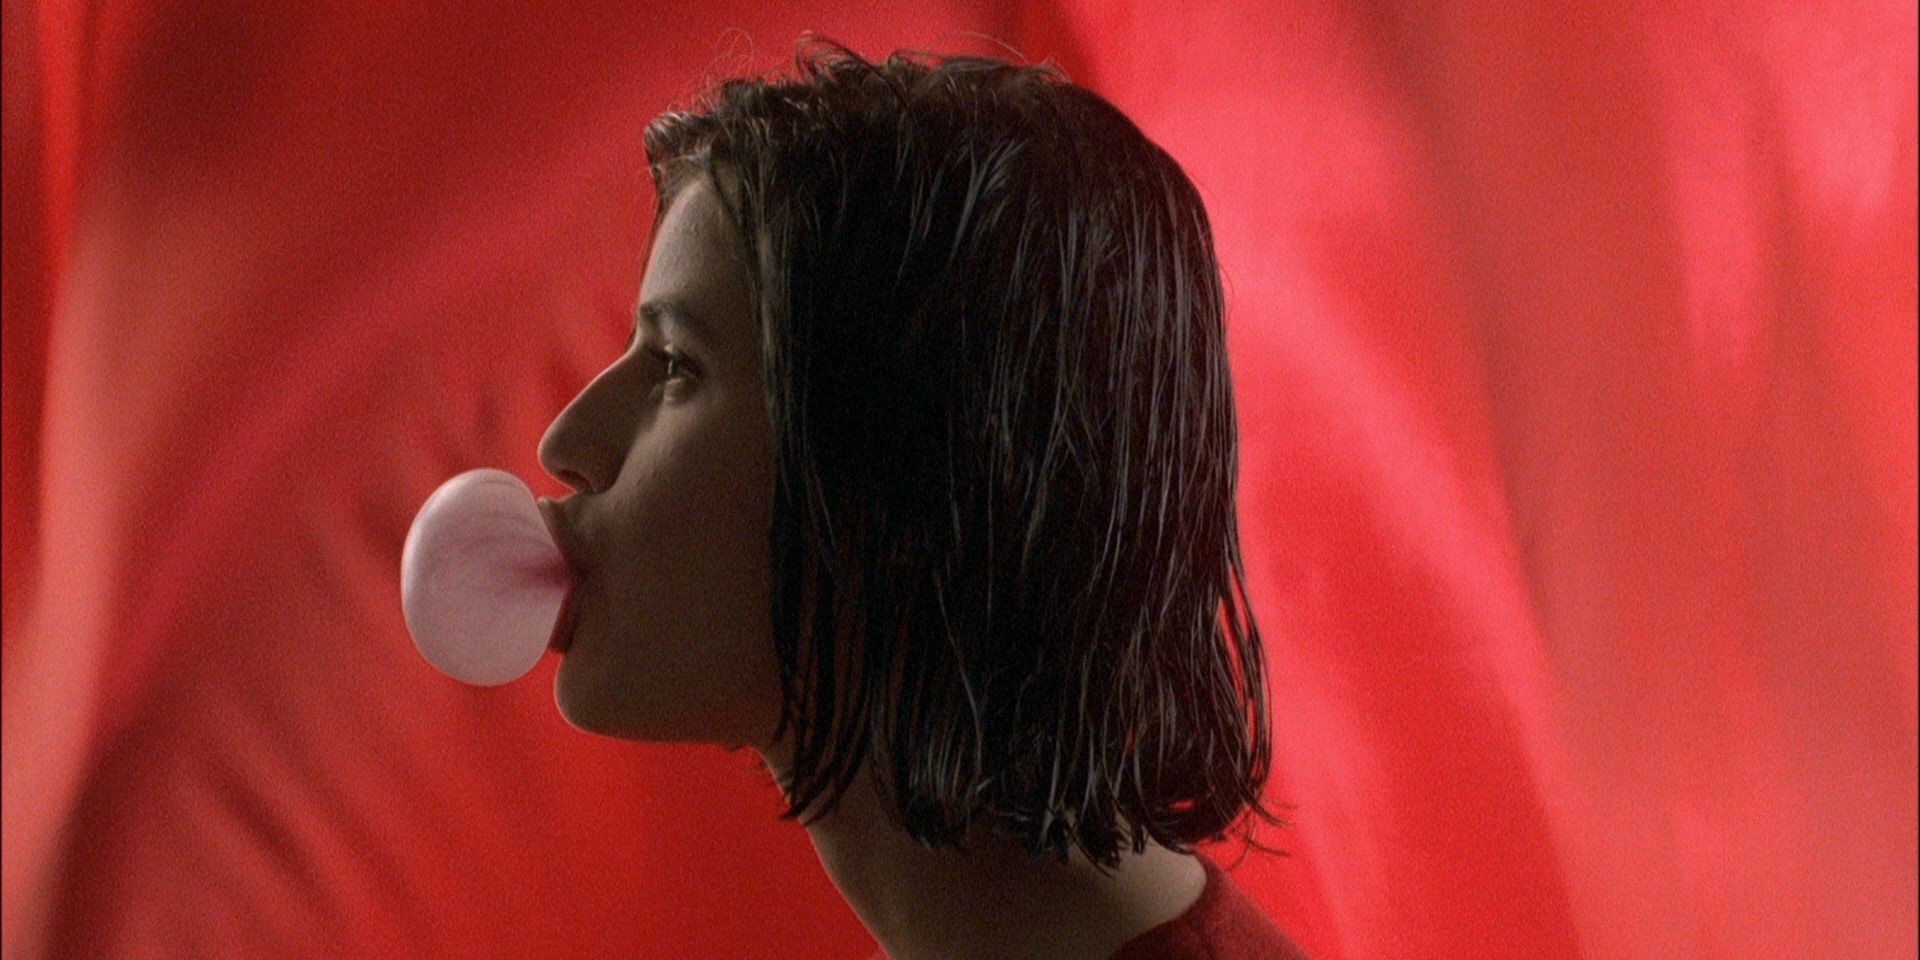 Irène Jacob as Valentine Dussaut blowing a bubble gum with a red background behind her